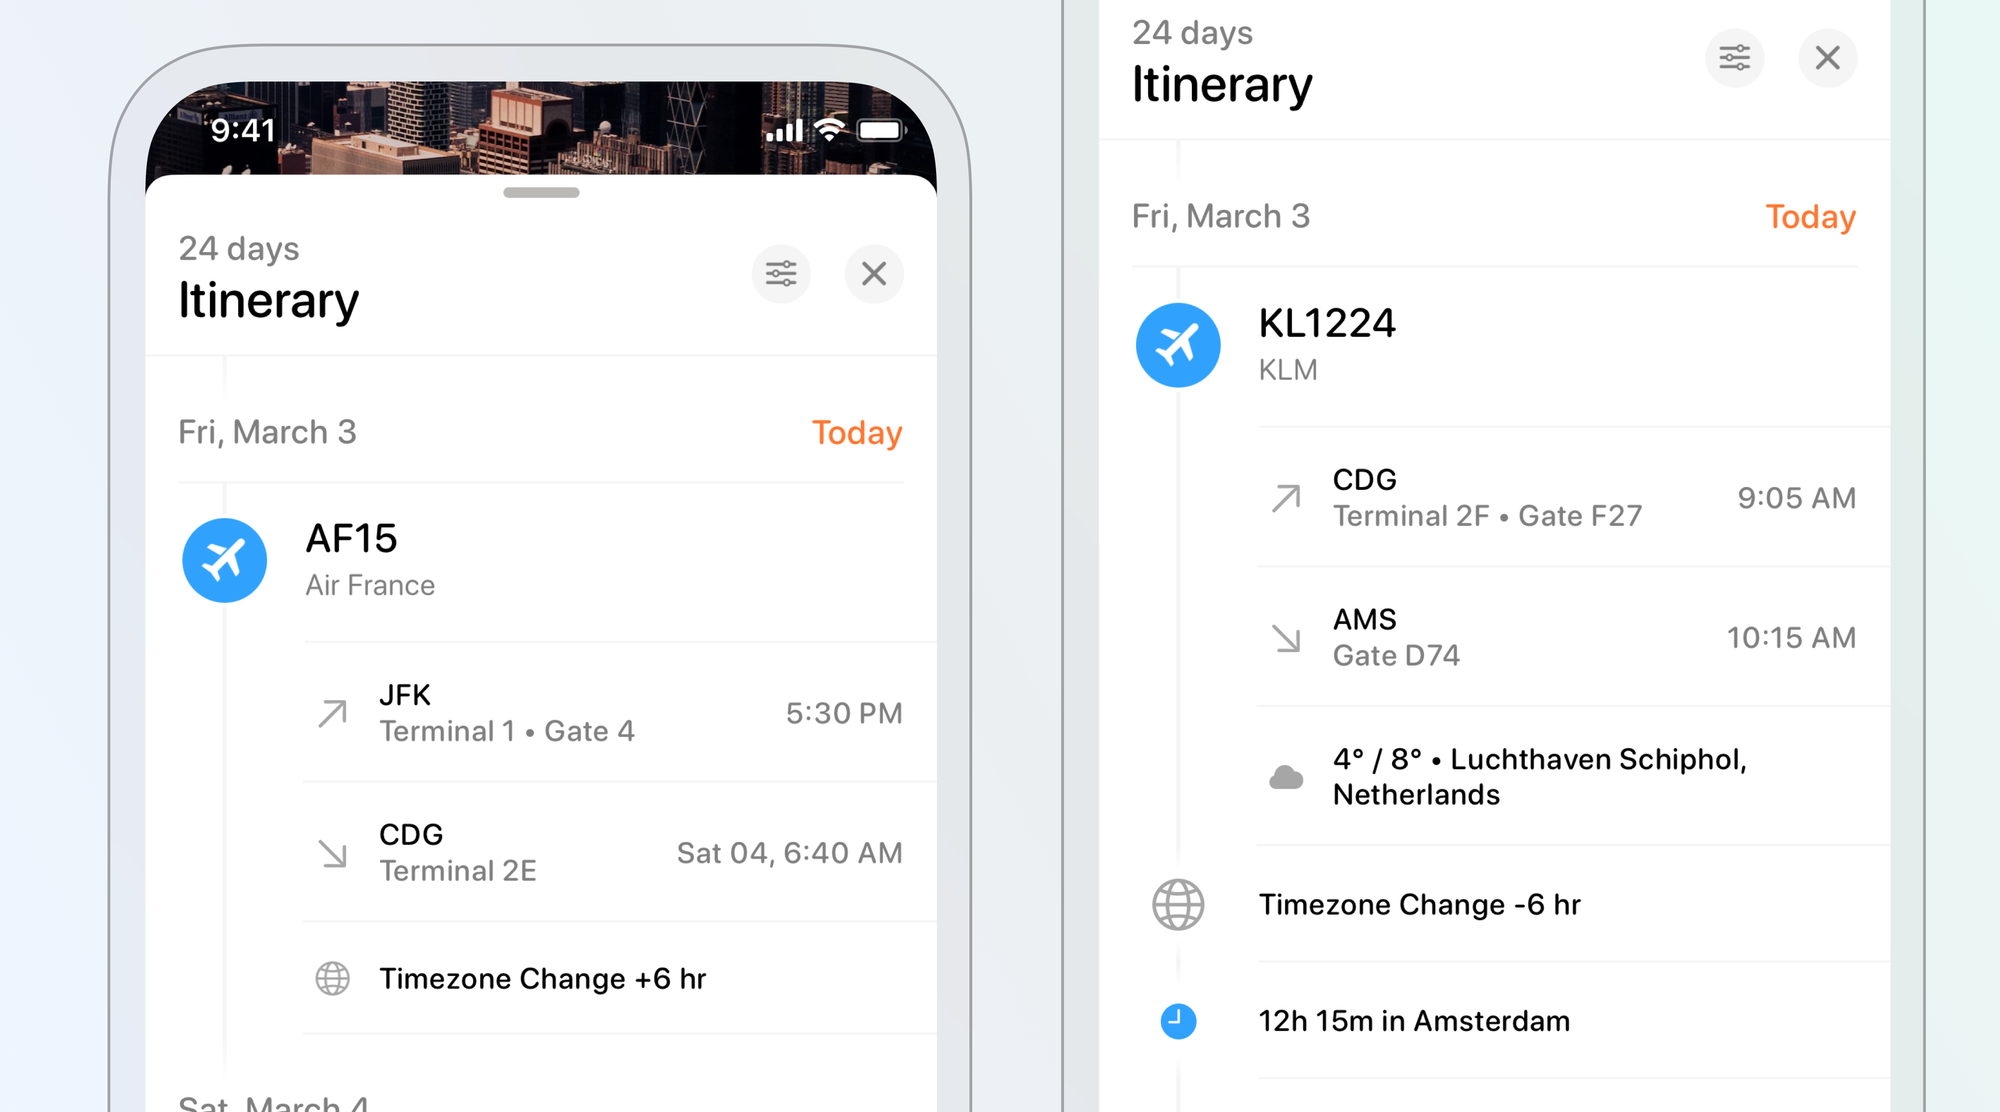 Tripsy 2.15: New Itinerary, Weather, Timezone Changes, and much more!